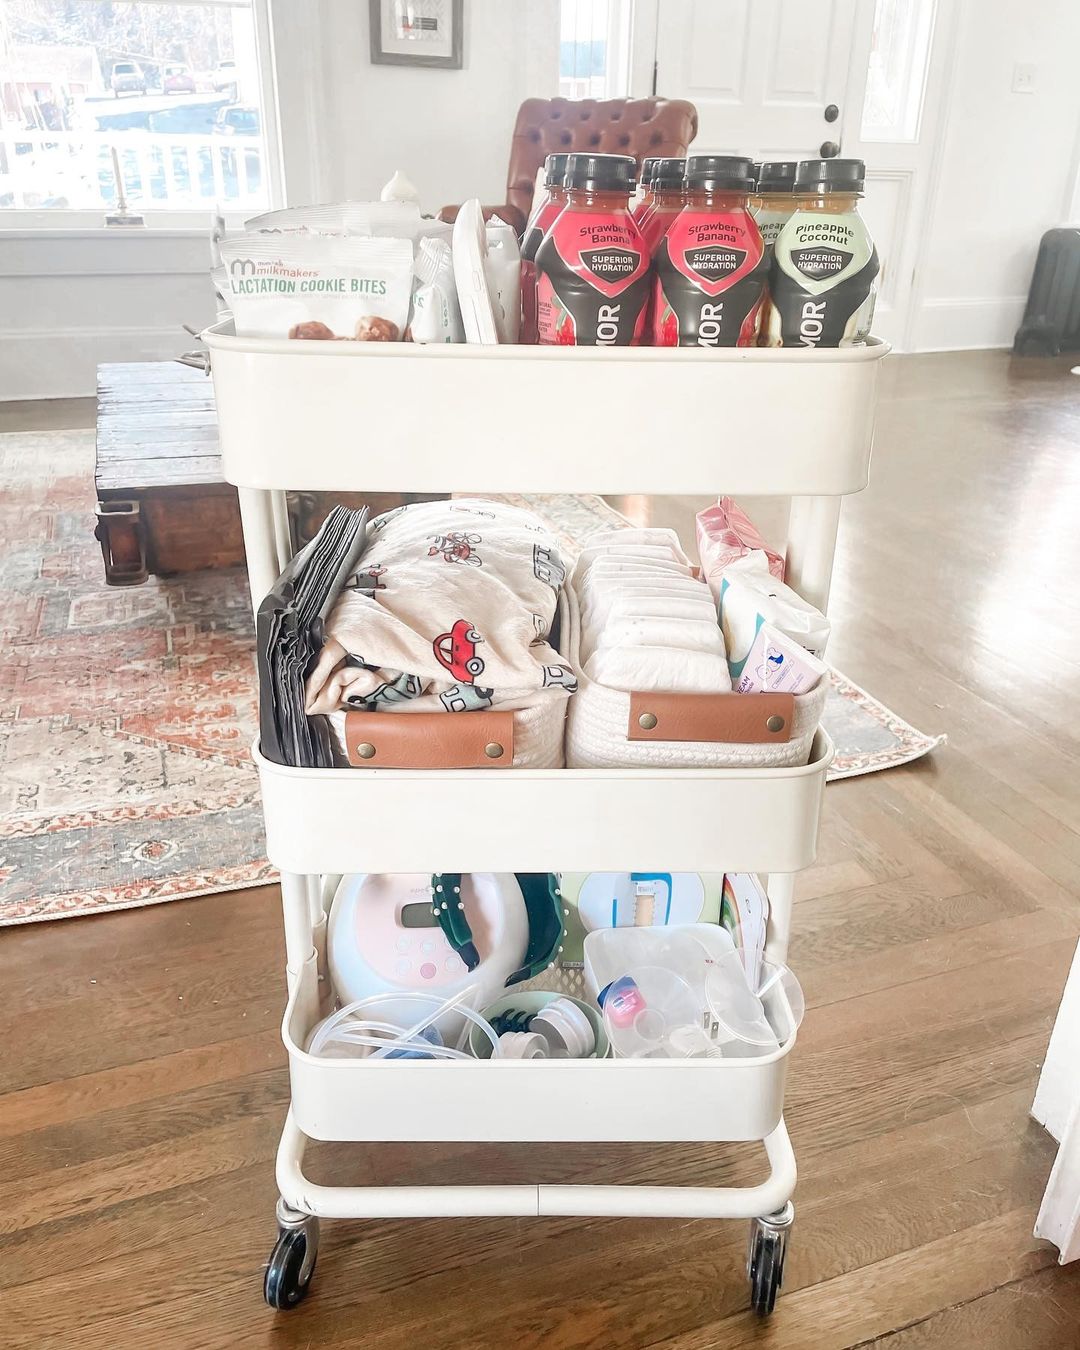 A rolling diaper station with various baby supplies. Photo by Instagram user @thathouseonmainstreet.